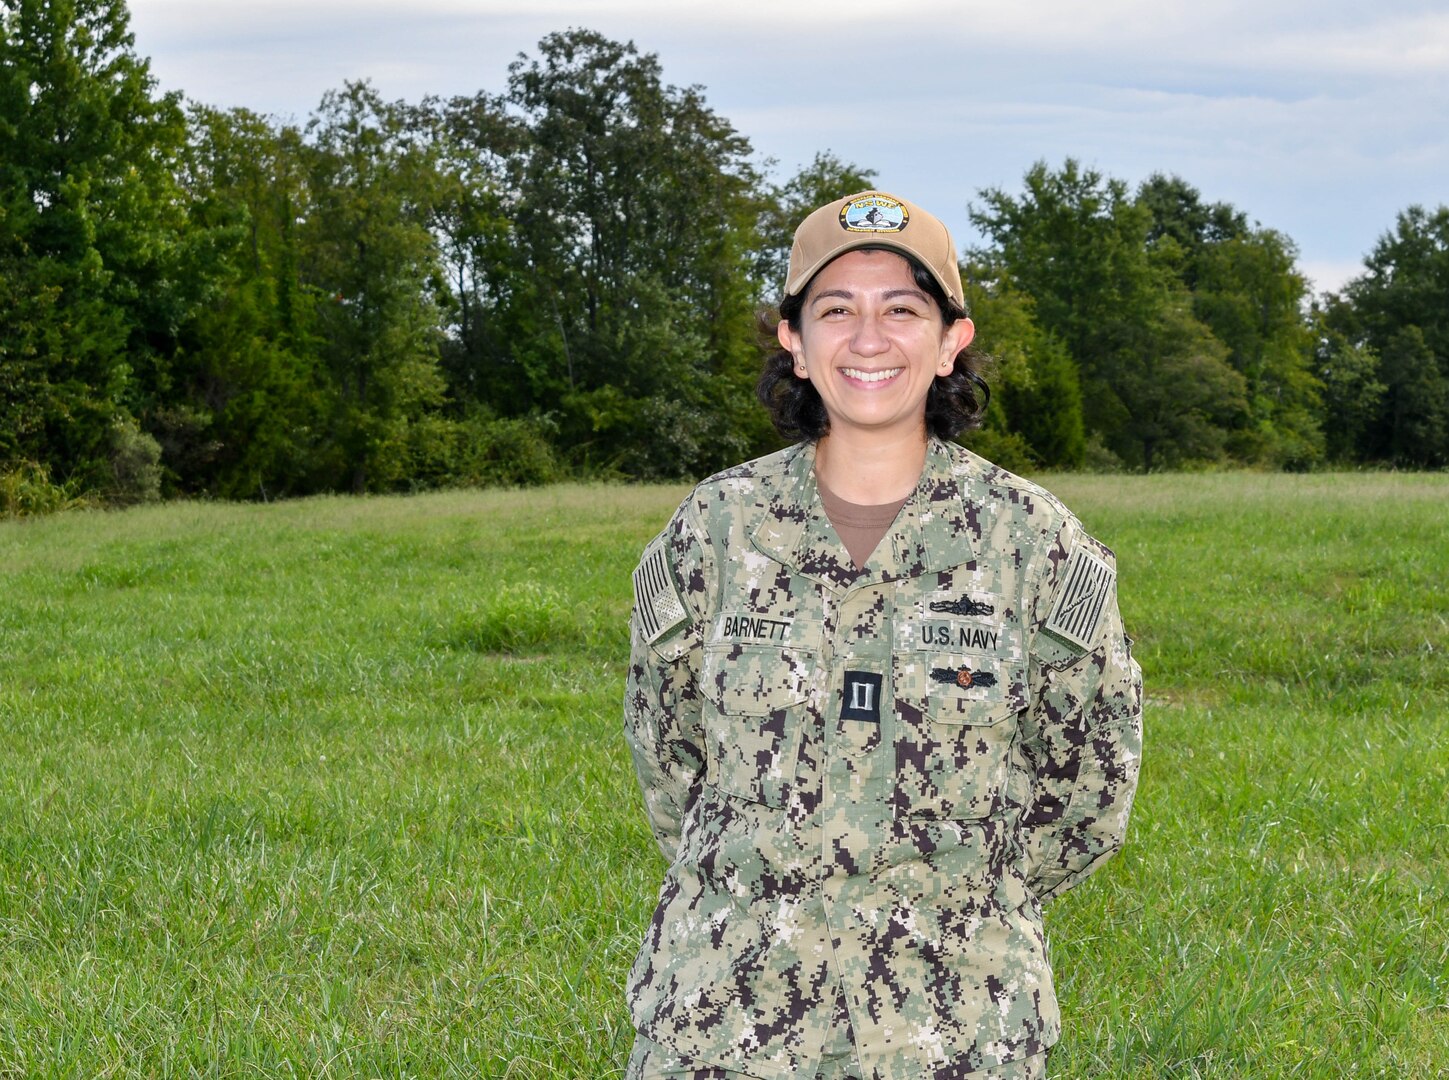 IMAGE: Naval Surface Warfare Center Dahlgren Division Command, senior leadership and workforce congratulate Engineering Duty Officer and Assistant Program Manager Lt. Cmdr. (sel) Sasha Barnett on her recent selection and her professional achievements.